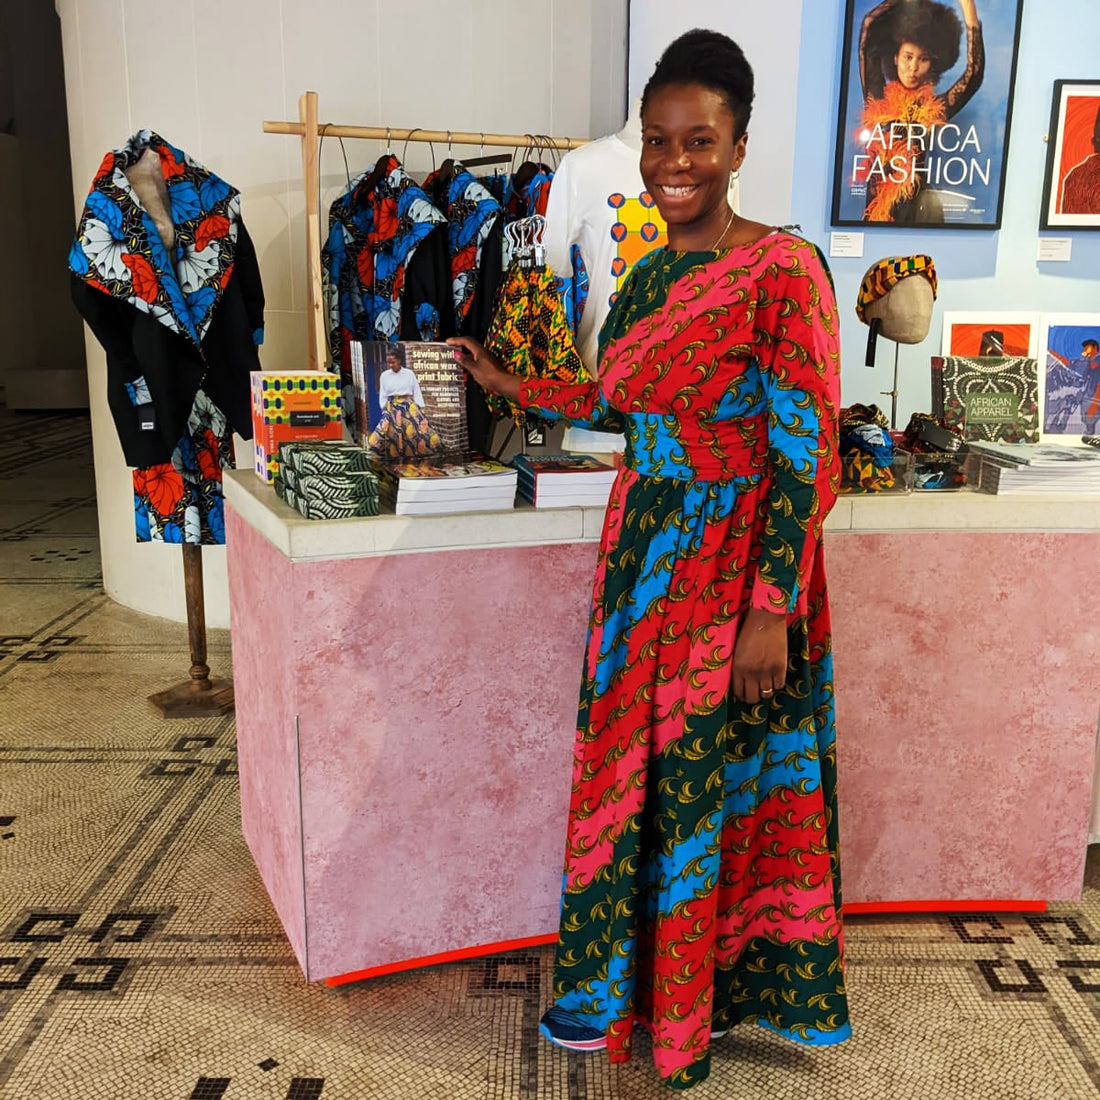 Adaku wearing an African print wax dress at the Africa Fashion exhibition at the V&A Museum 